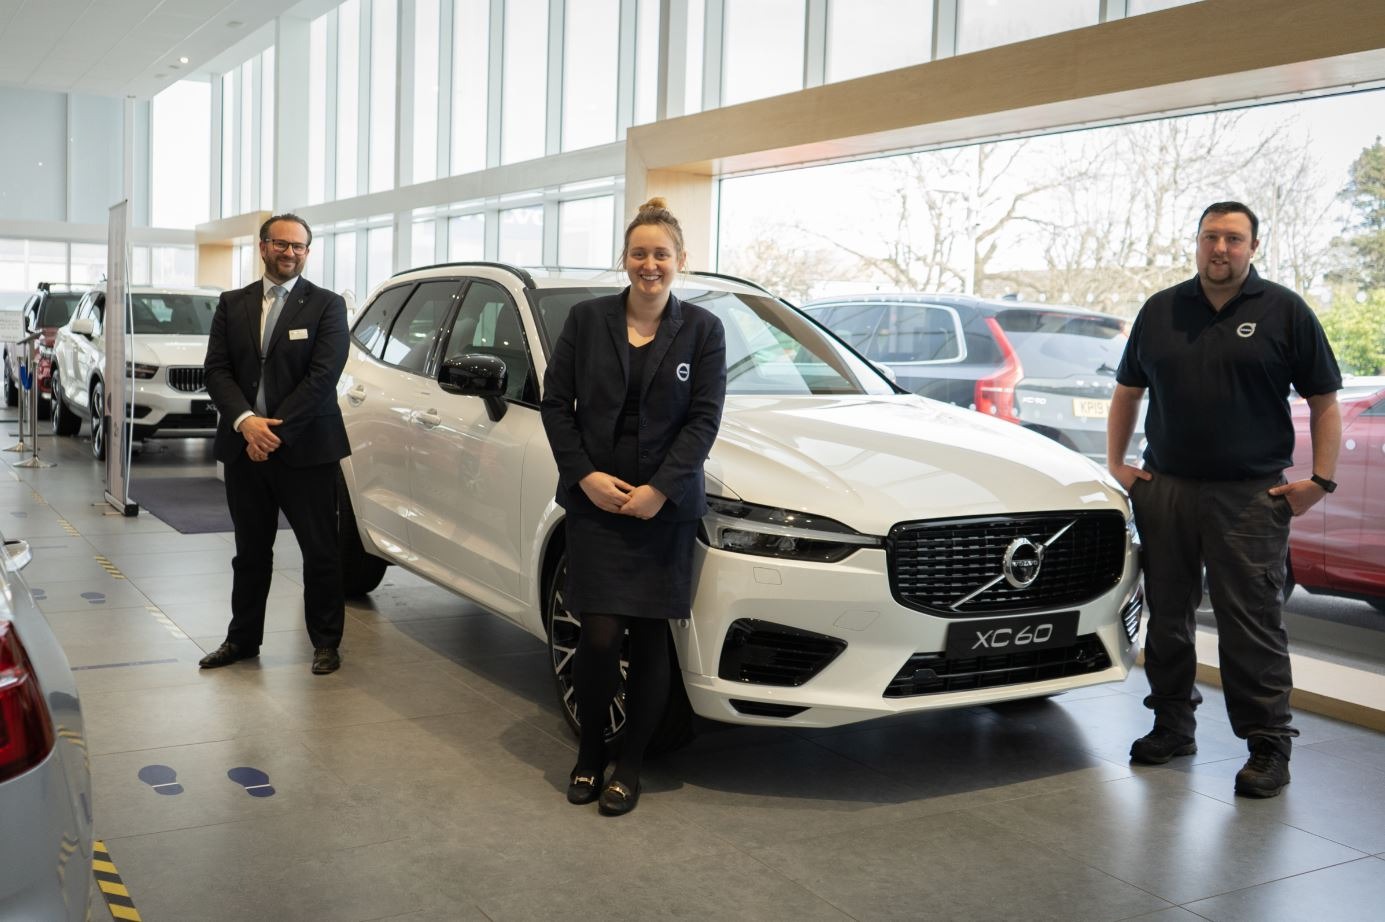 Promotions at Volvo Cars Poole